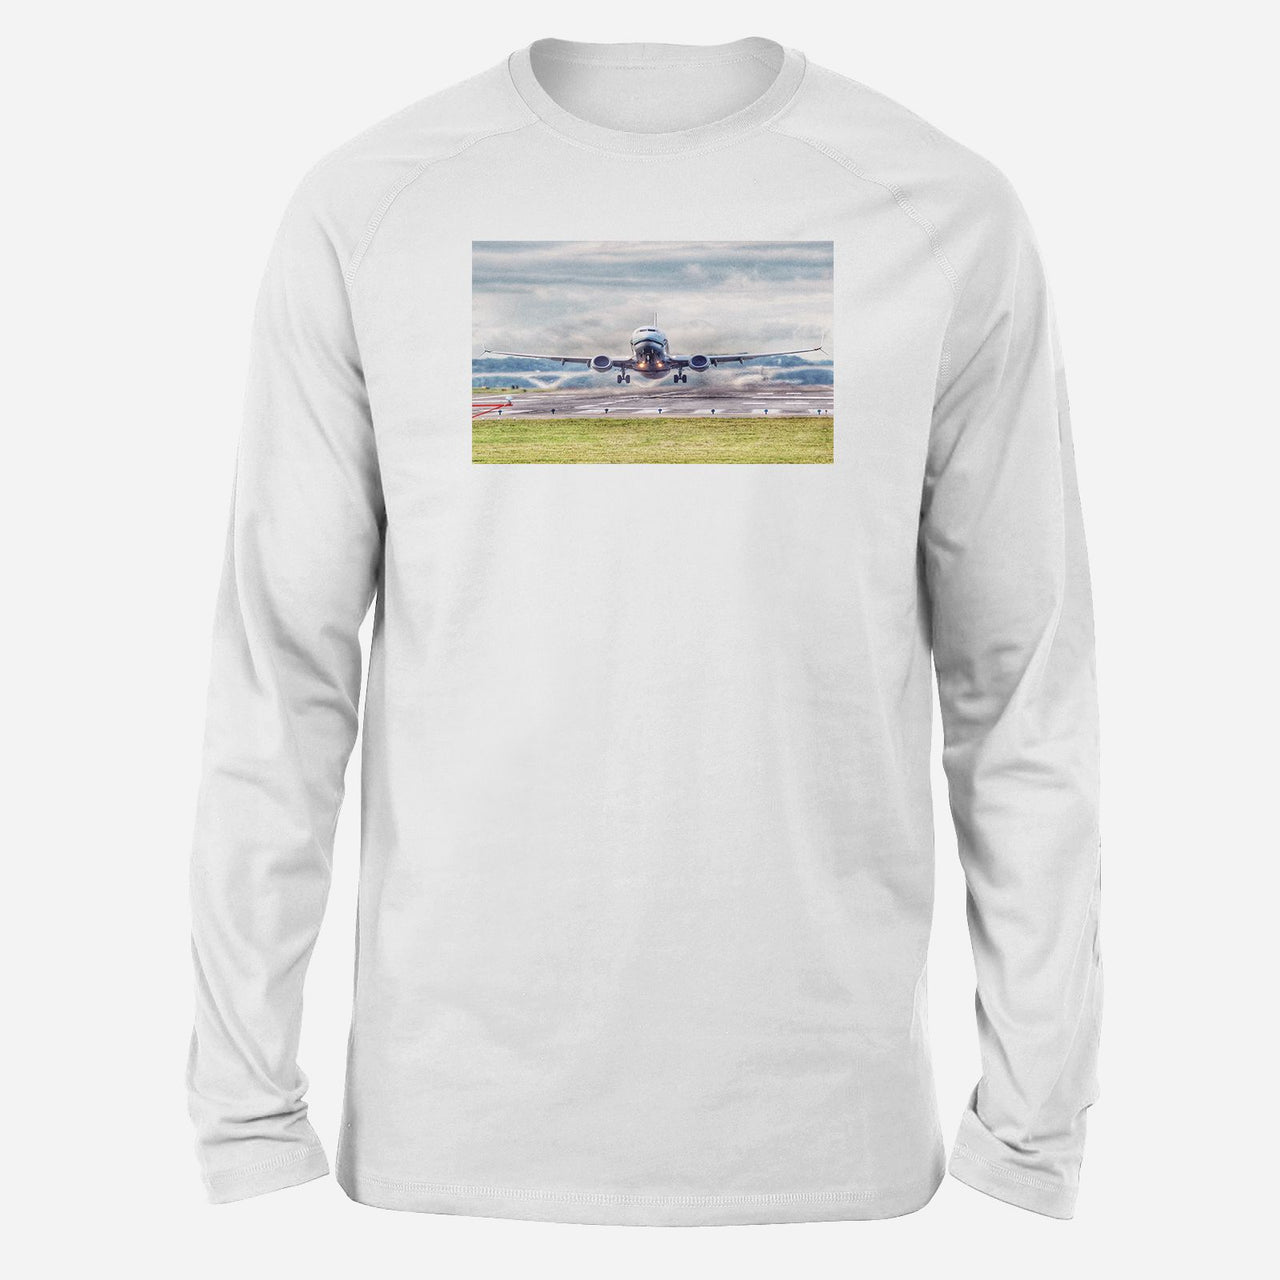 Departing Boeing 737 Designed Long-Sleeve T-Shirts